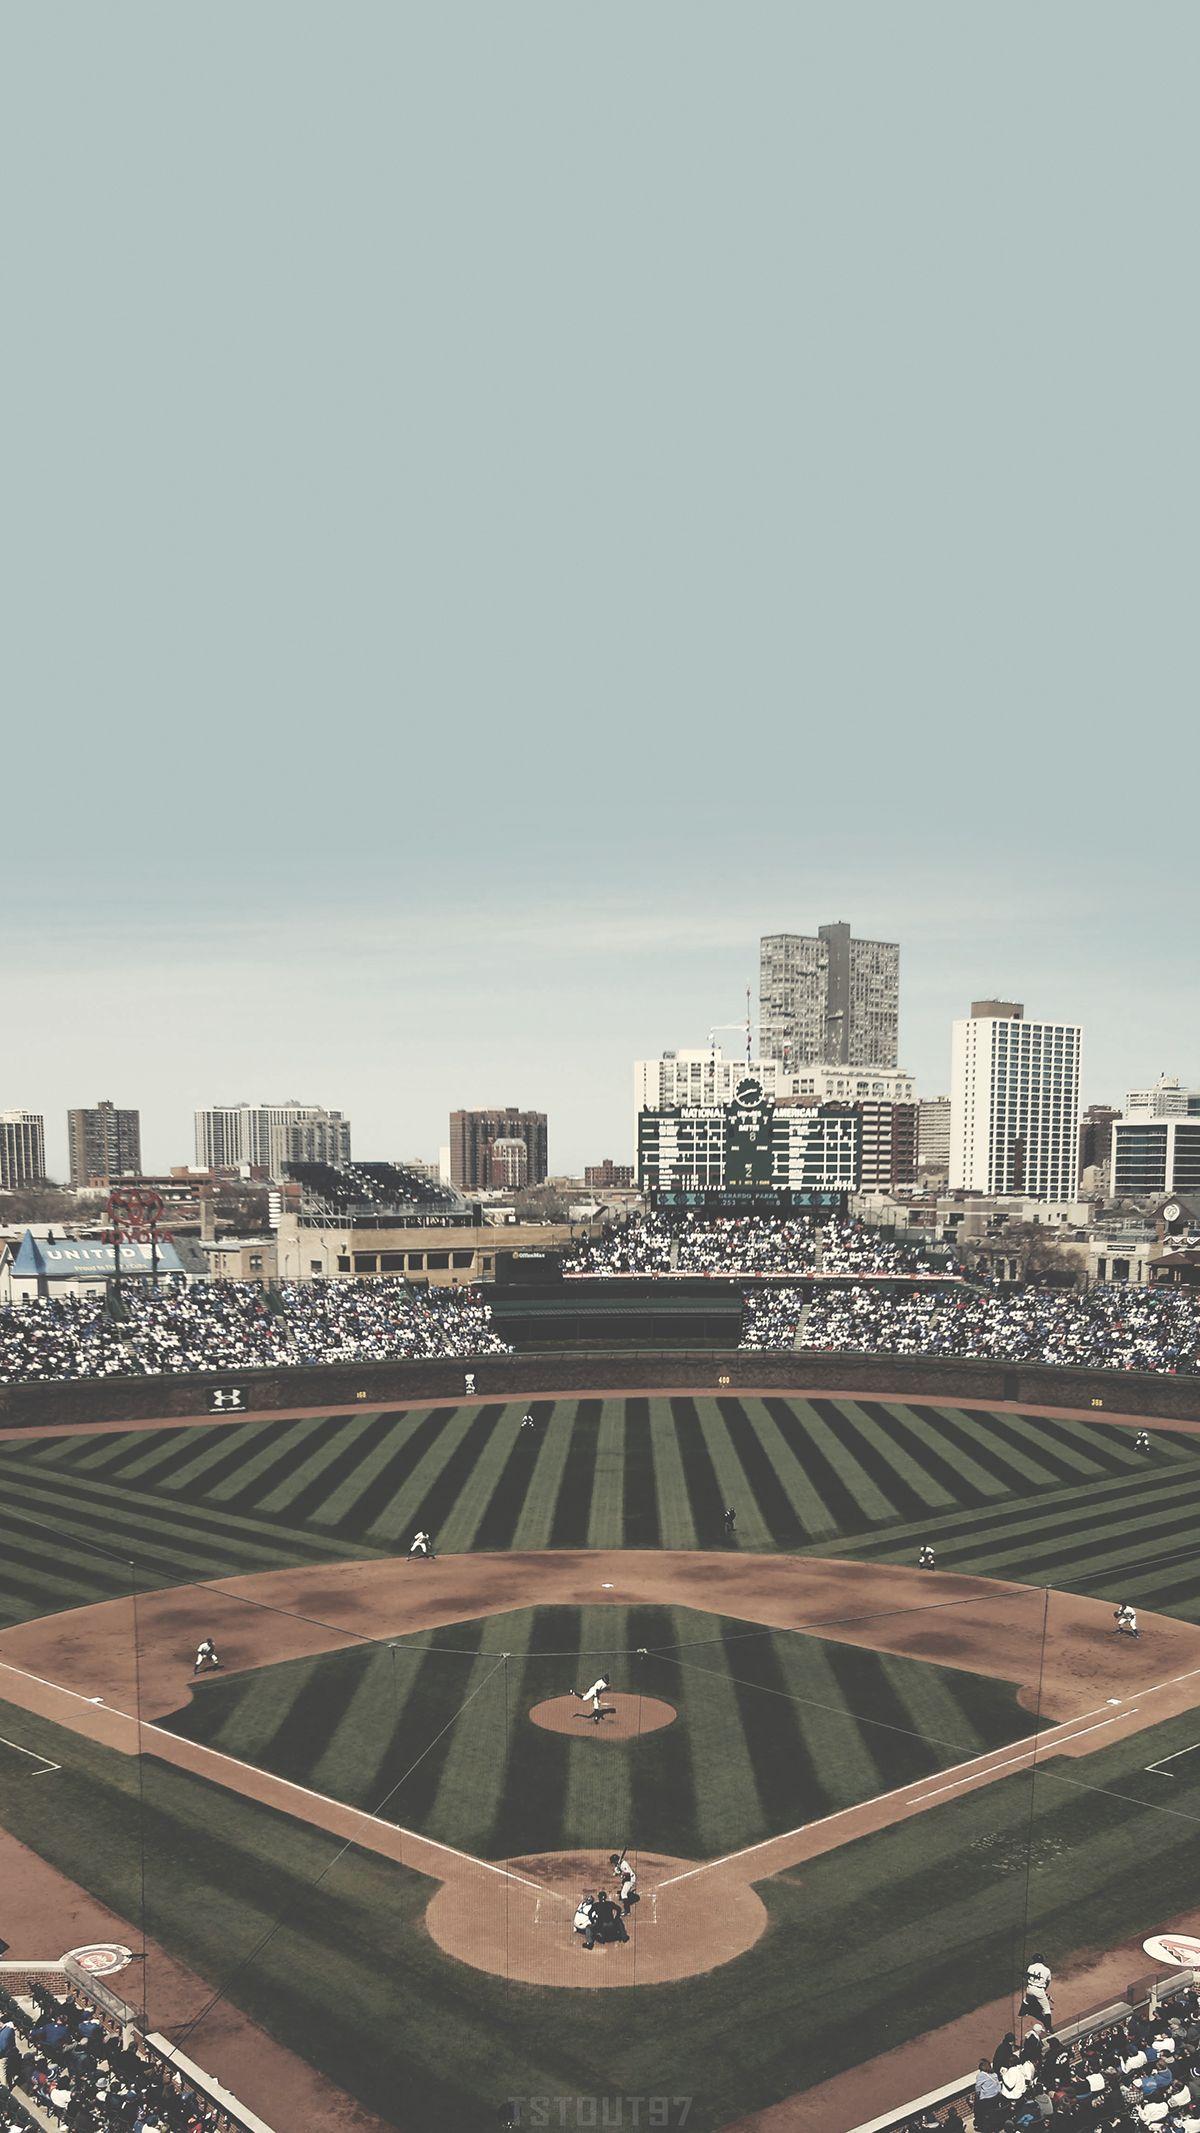 Chicago Cubs: Wrigley Field Mobile Wallpaper